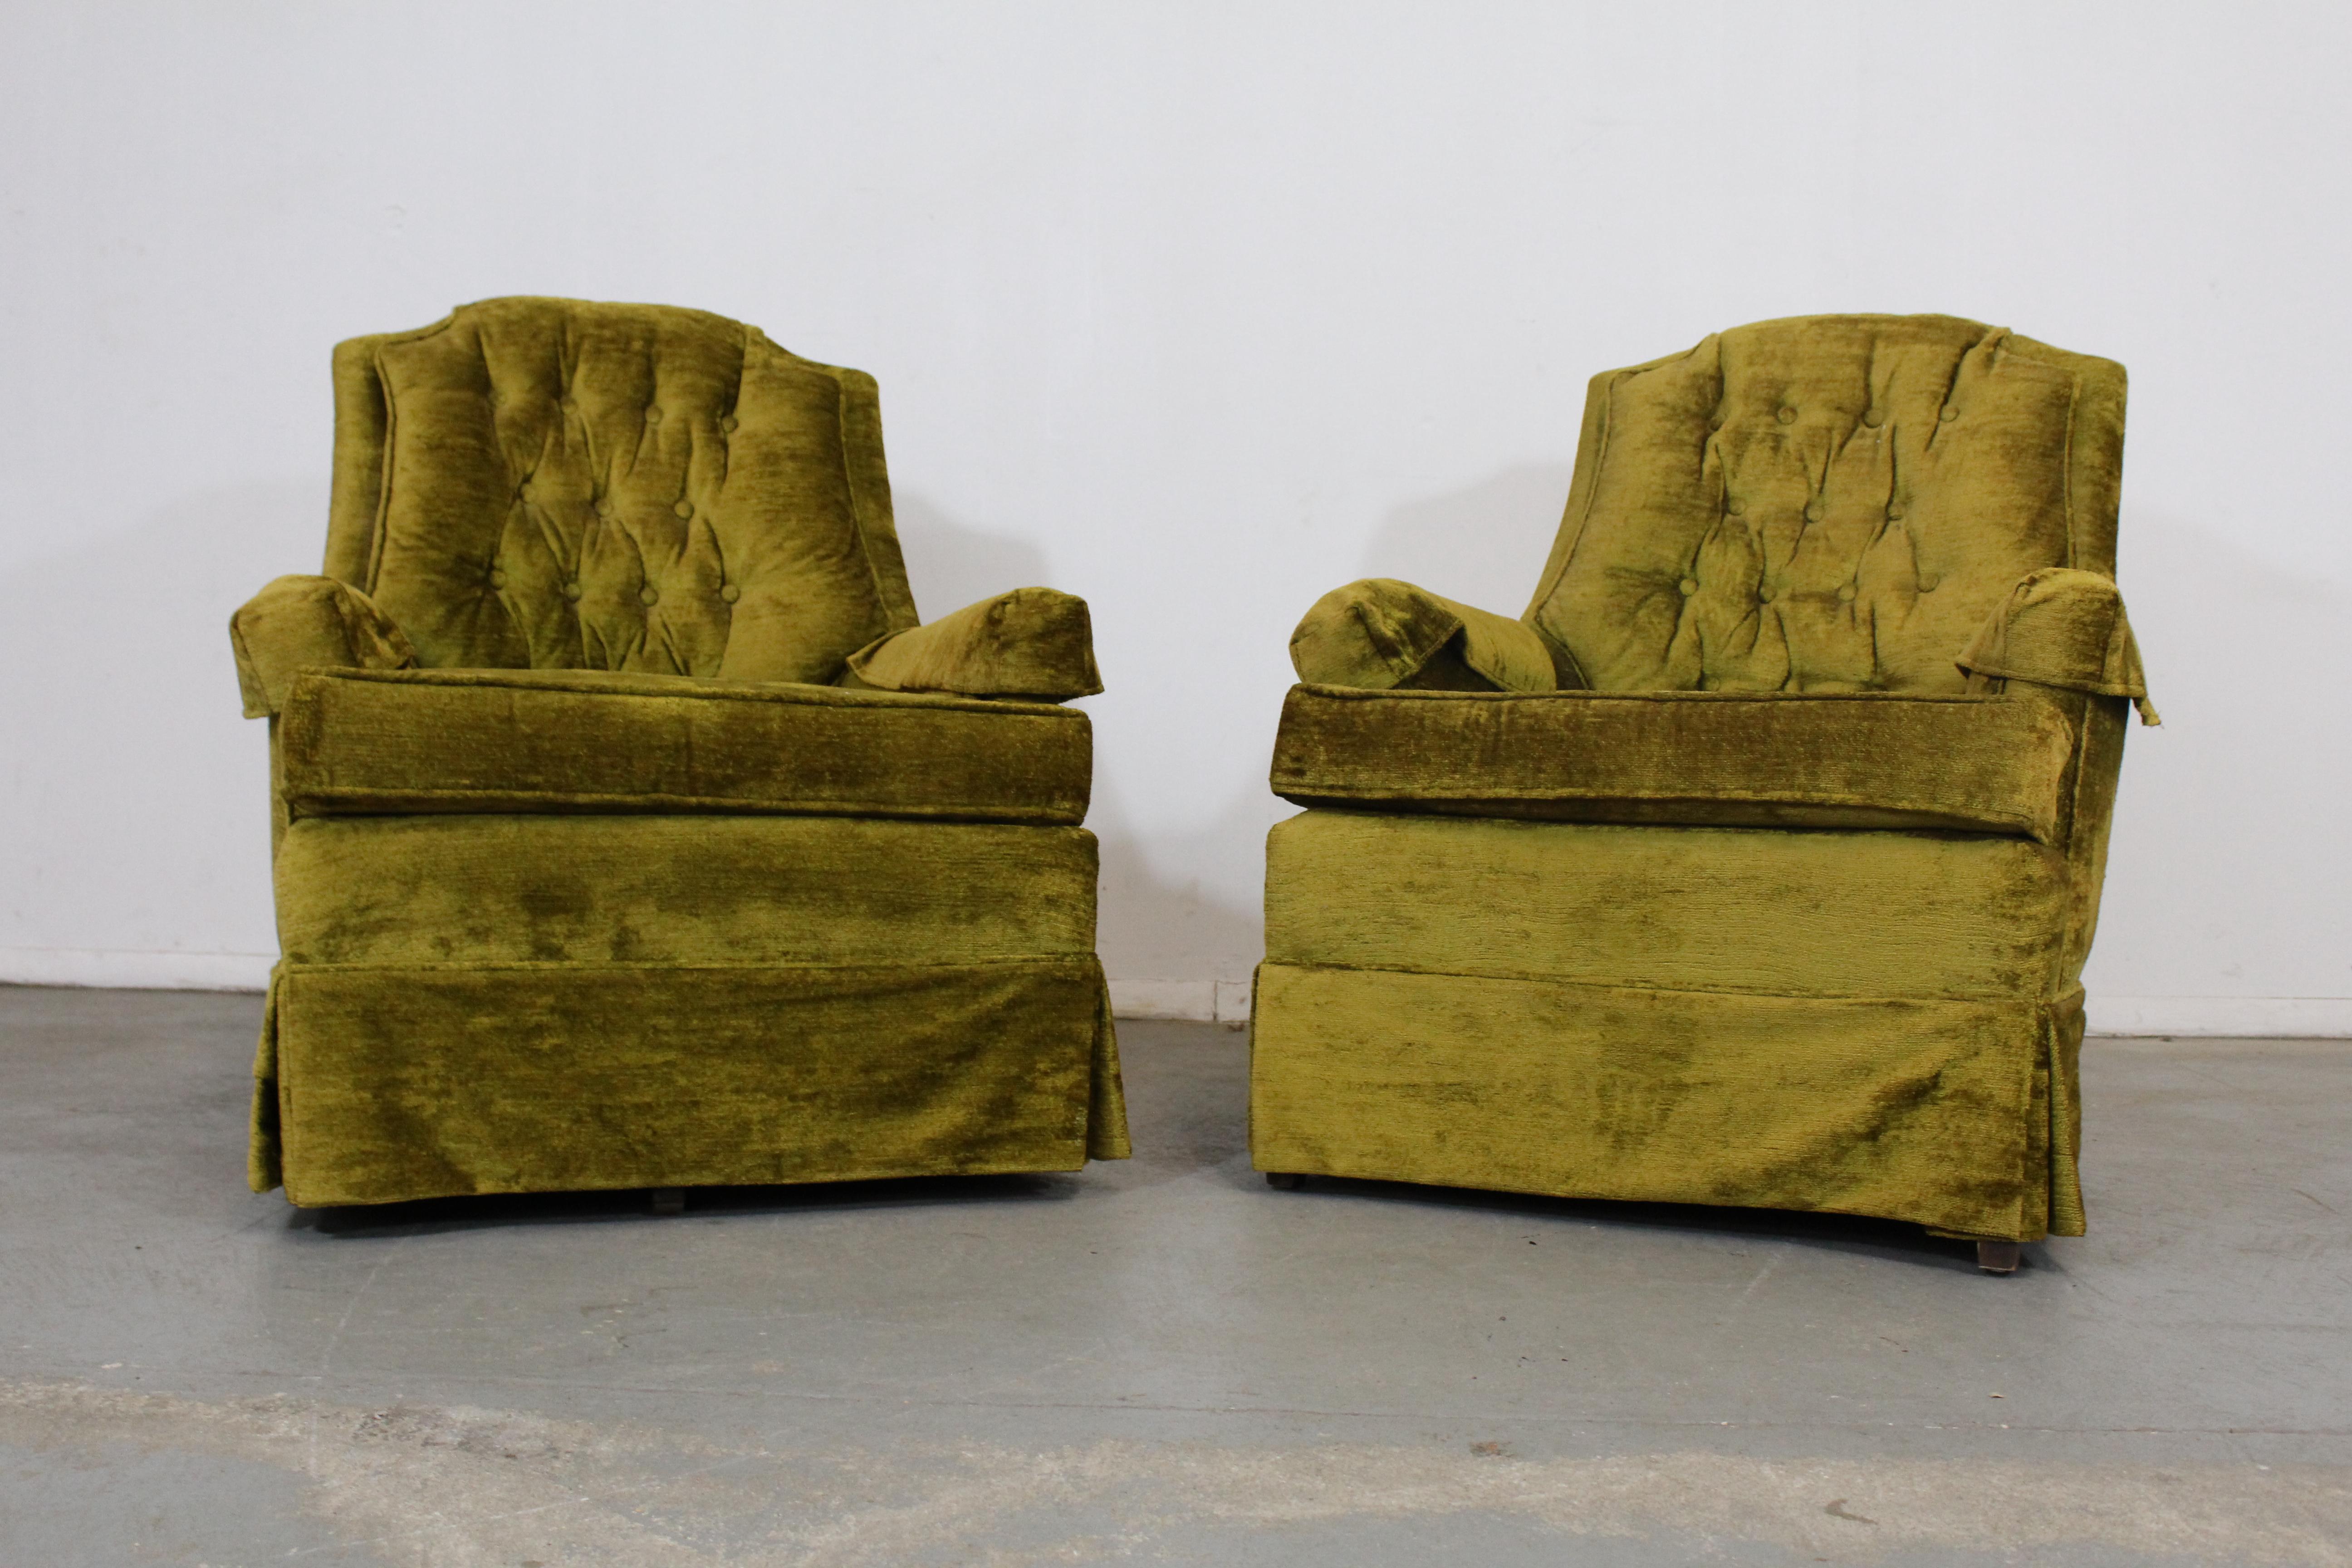 Pair of Mid-Century Modern tufted back club chairs
Offered is a pair of club chairs. The chairs feature 1 swivel rocker and 1 legged chair the upholstery is in unusable condition and is structurally sound. The upholstery has minor age wear, stains